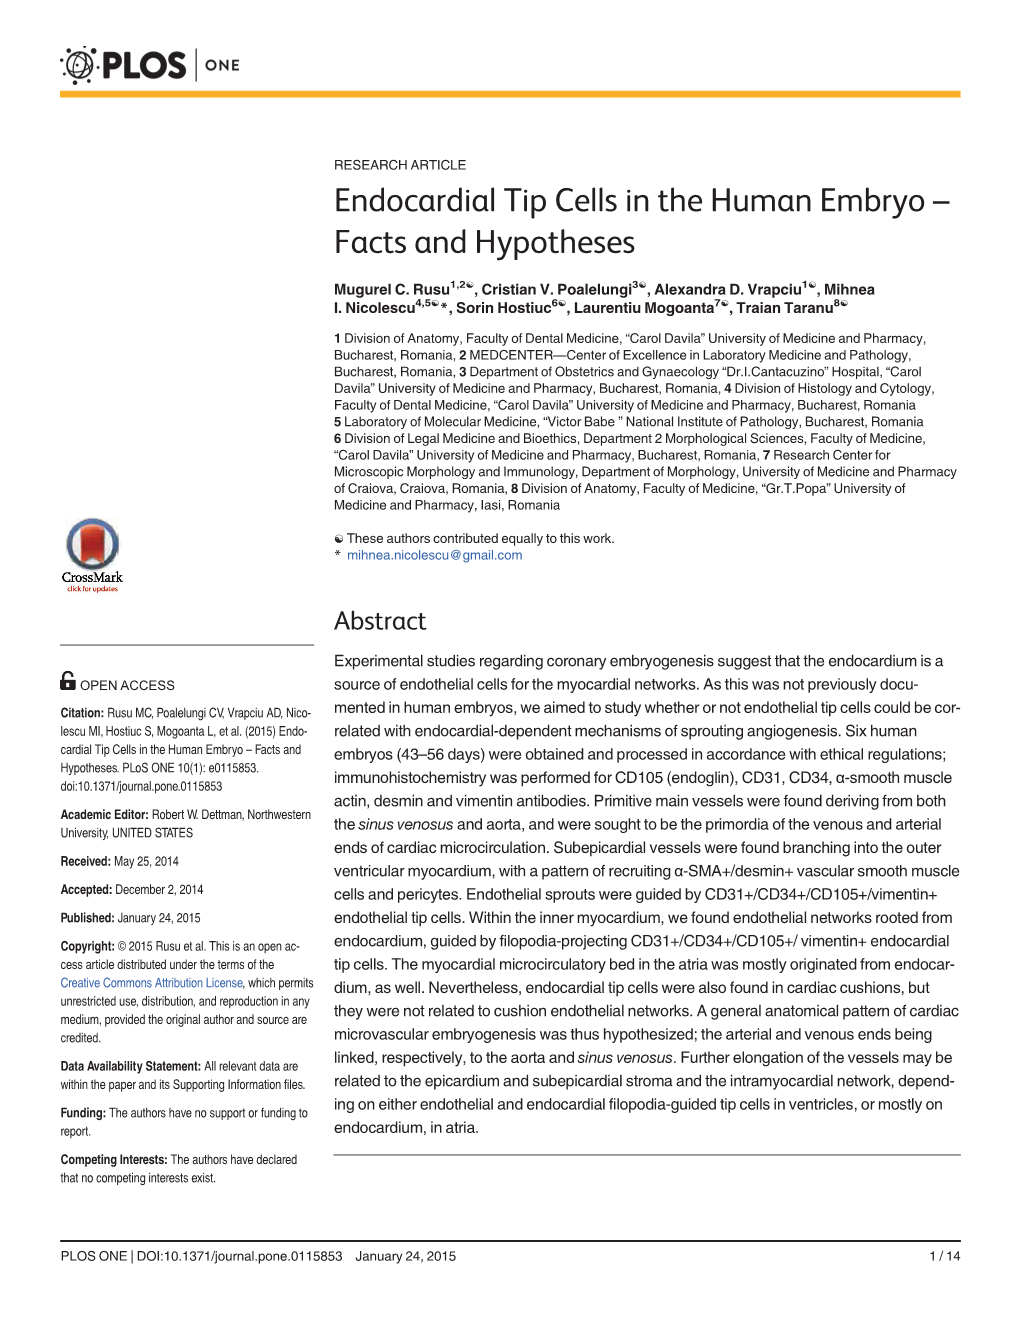 Endocardial Tip Cells in the Human Embryo – Facts and Hypotheses